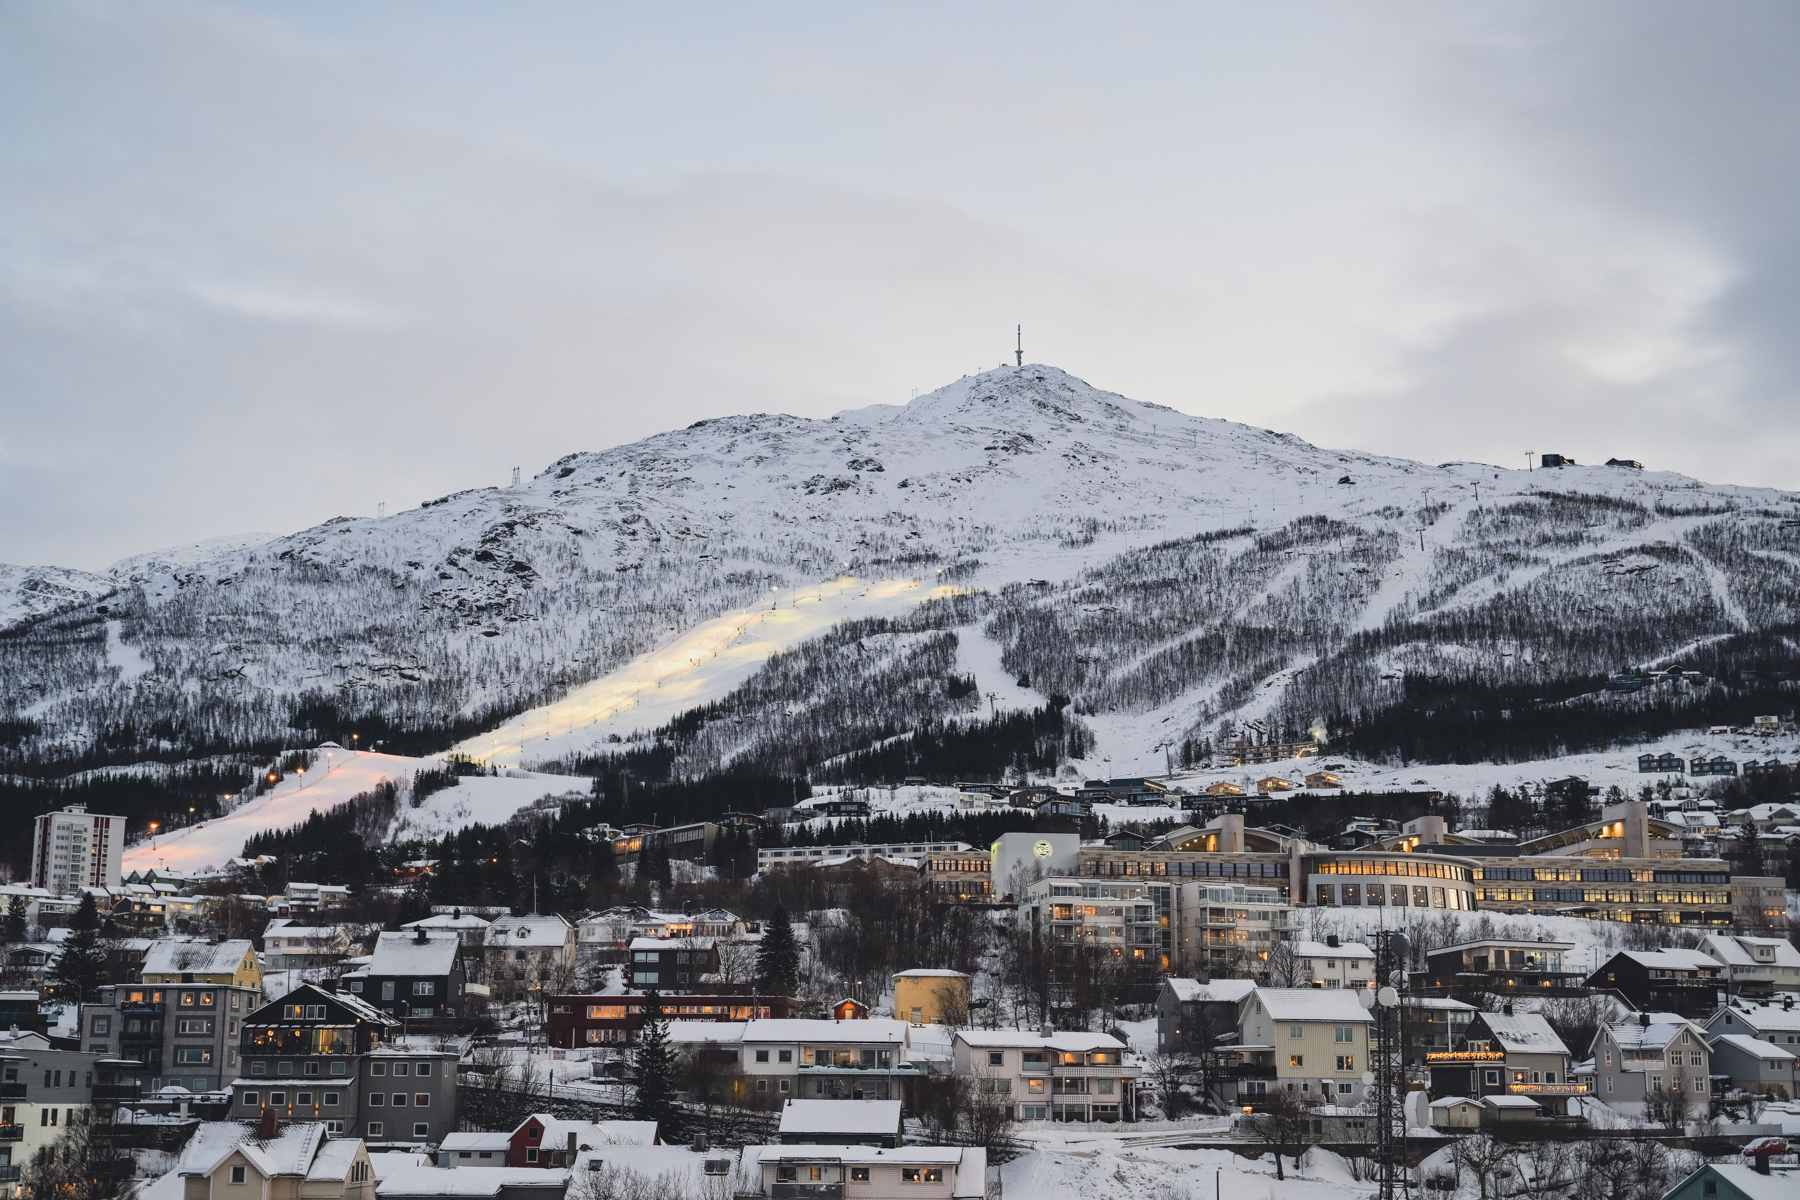 From city to summit! The Narvikfjellet mountain creates a great background of the city. ©Marie Nystad / www.nordnorge.com